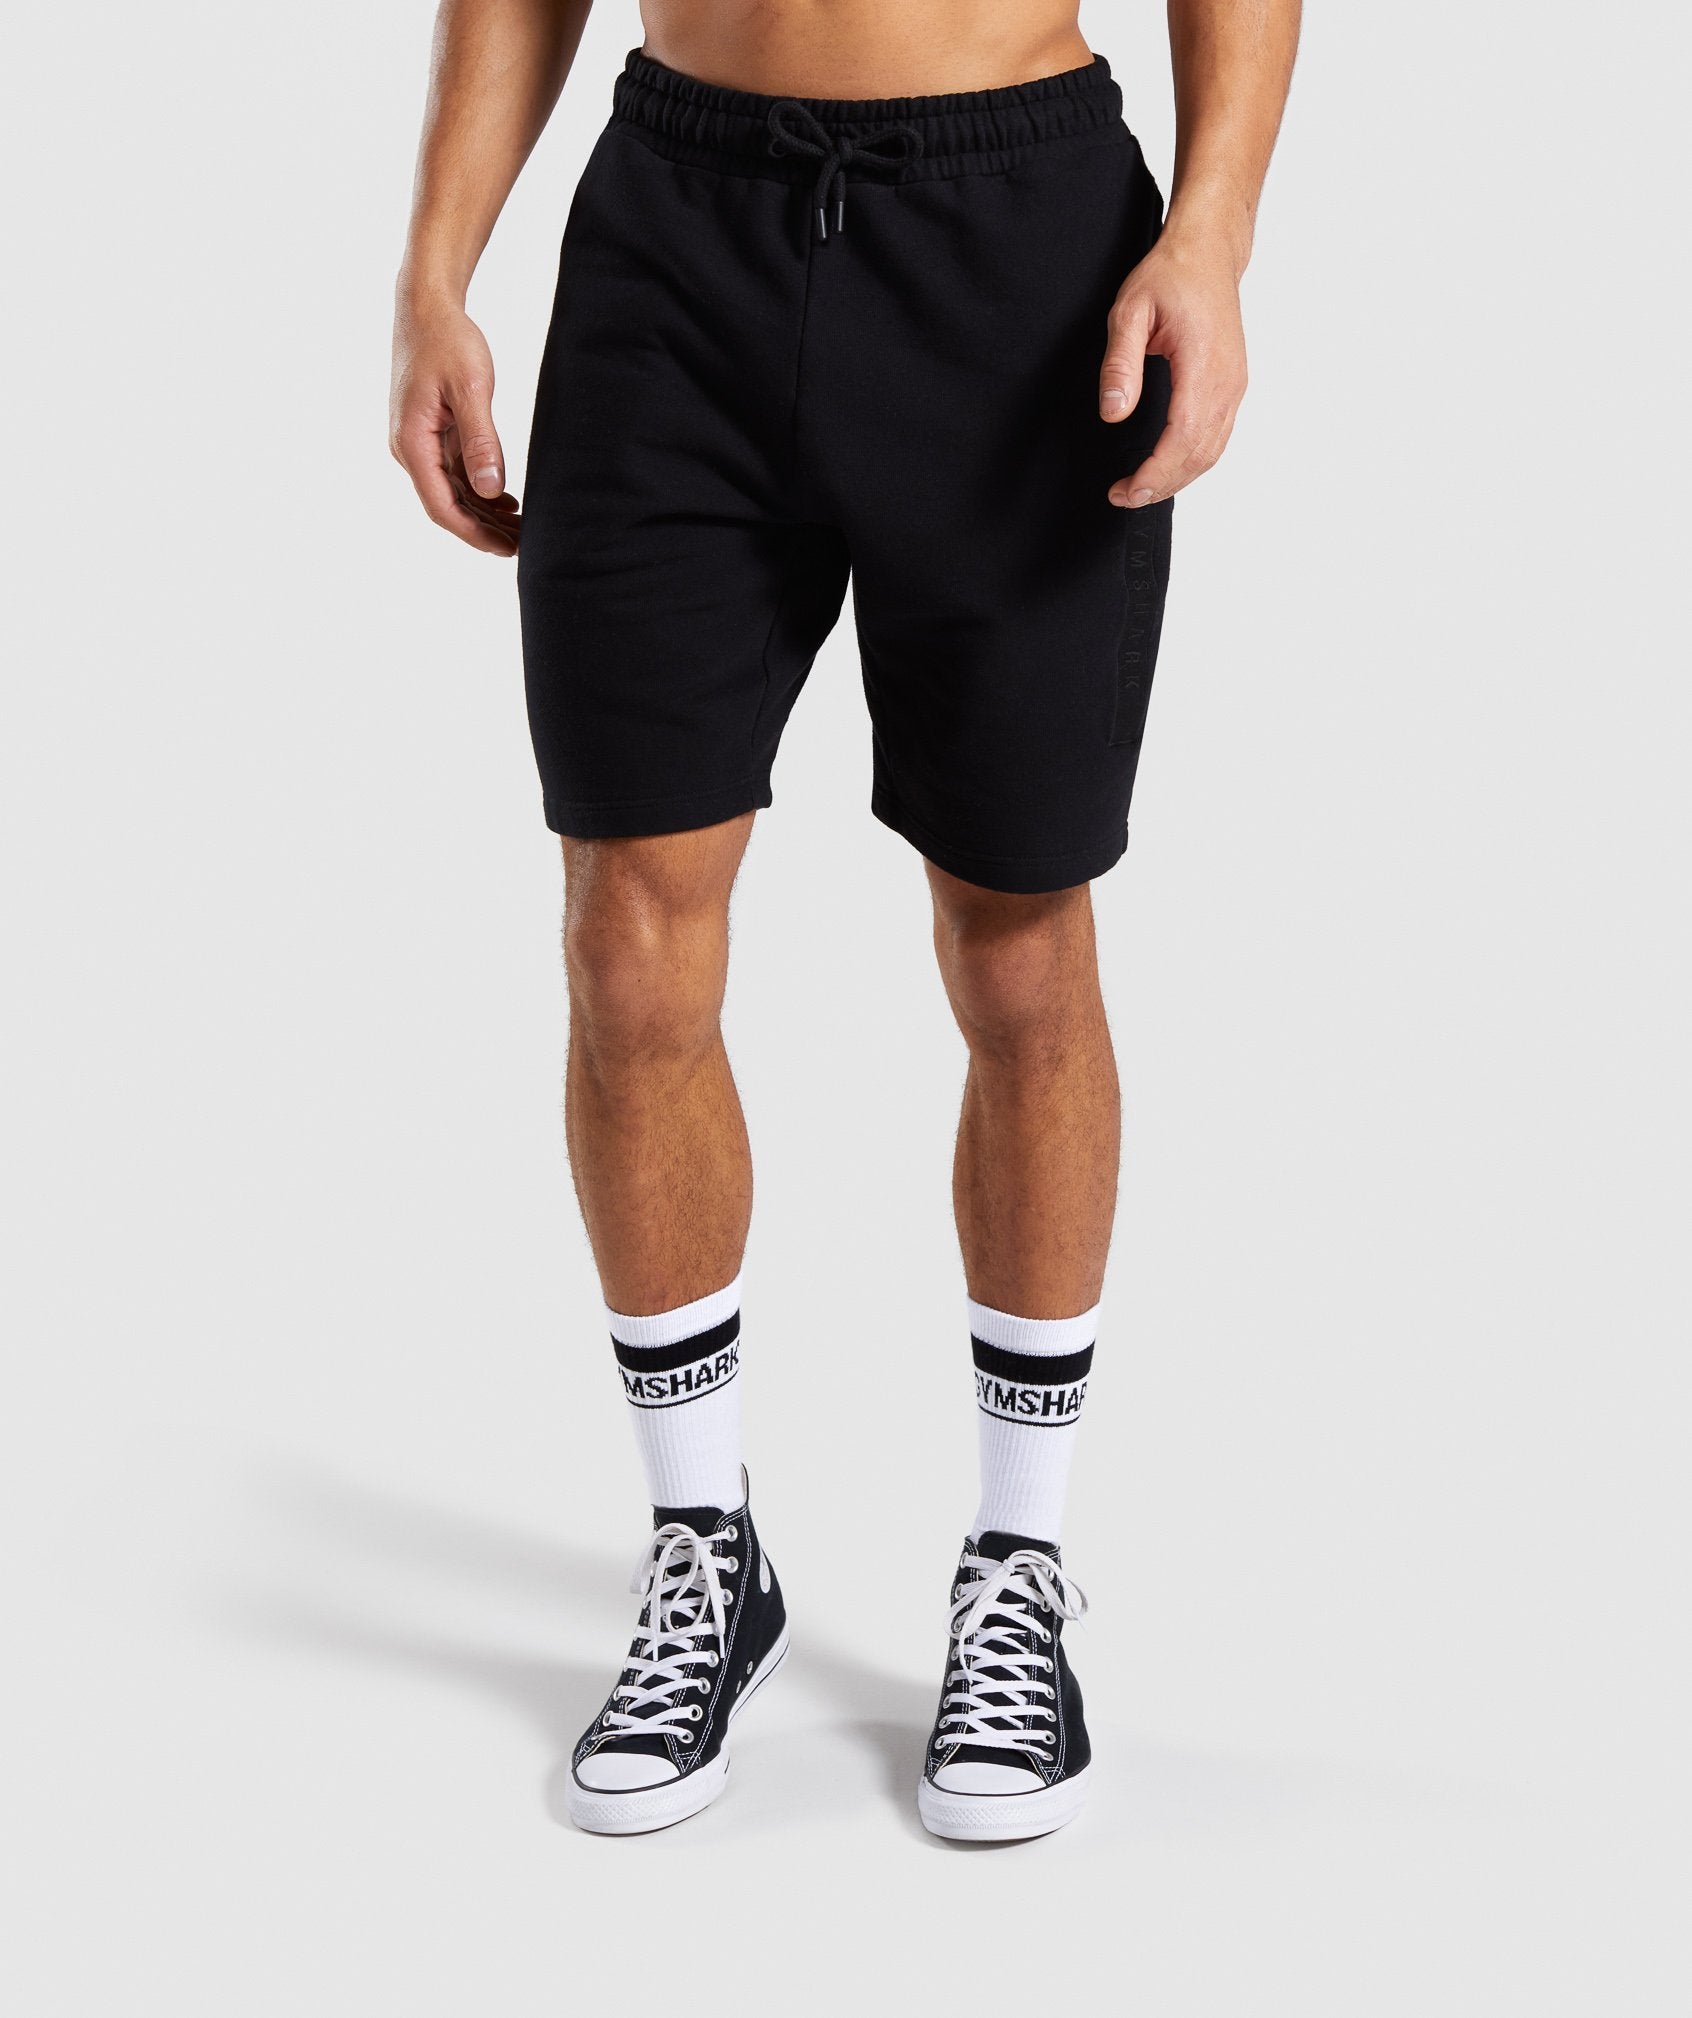 Crucial Shorts in Black - view 1